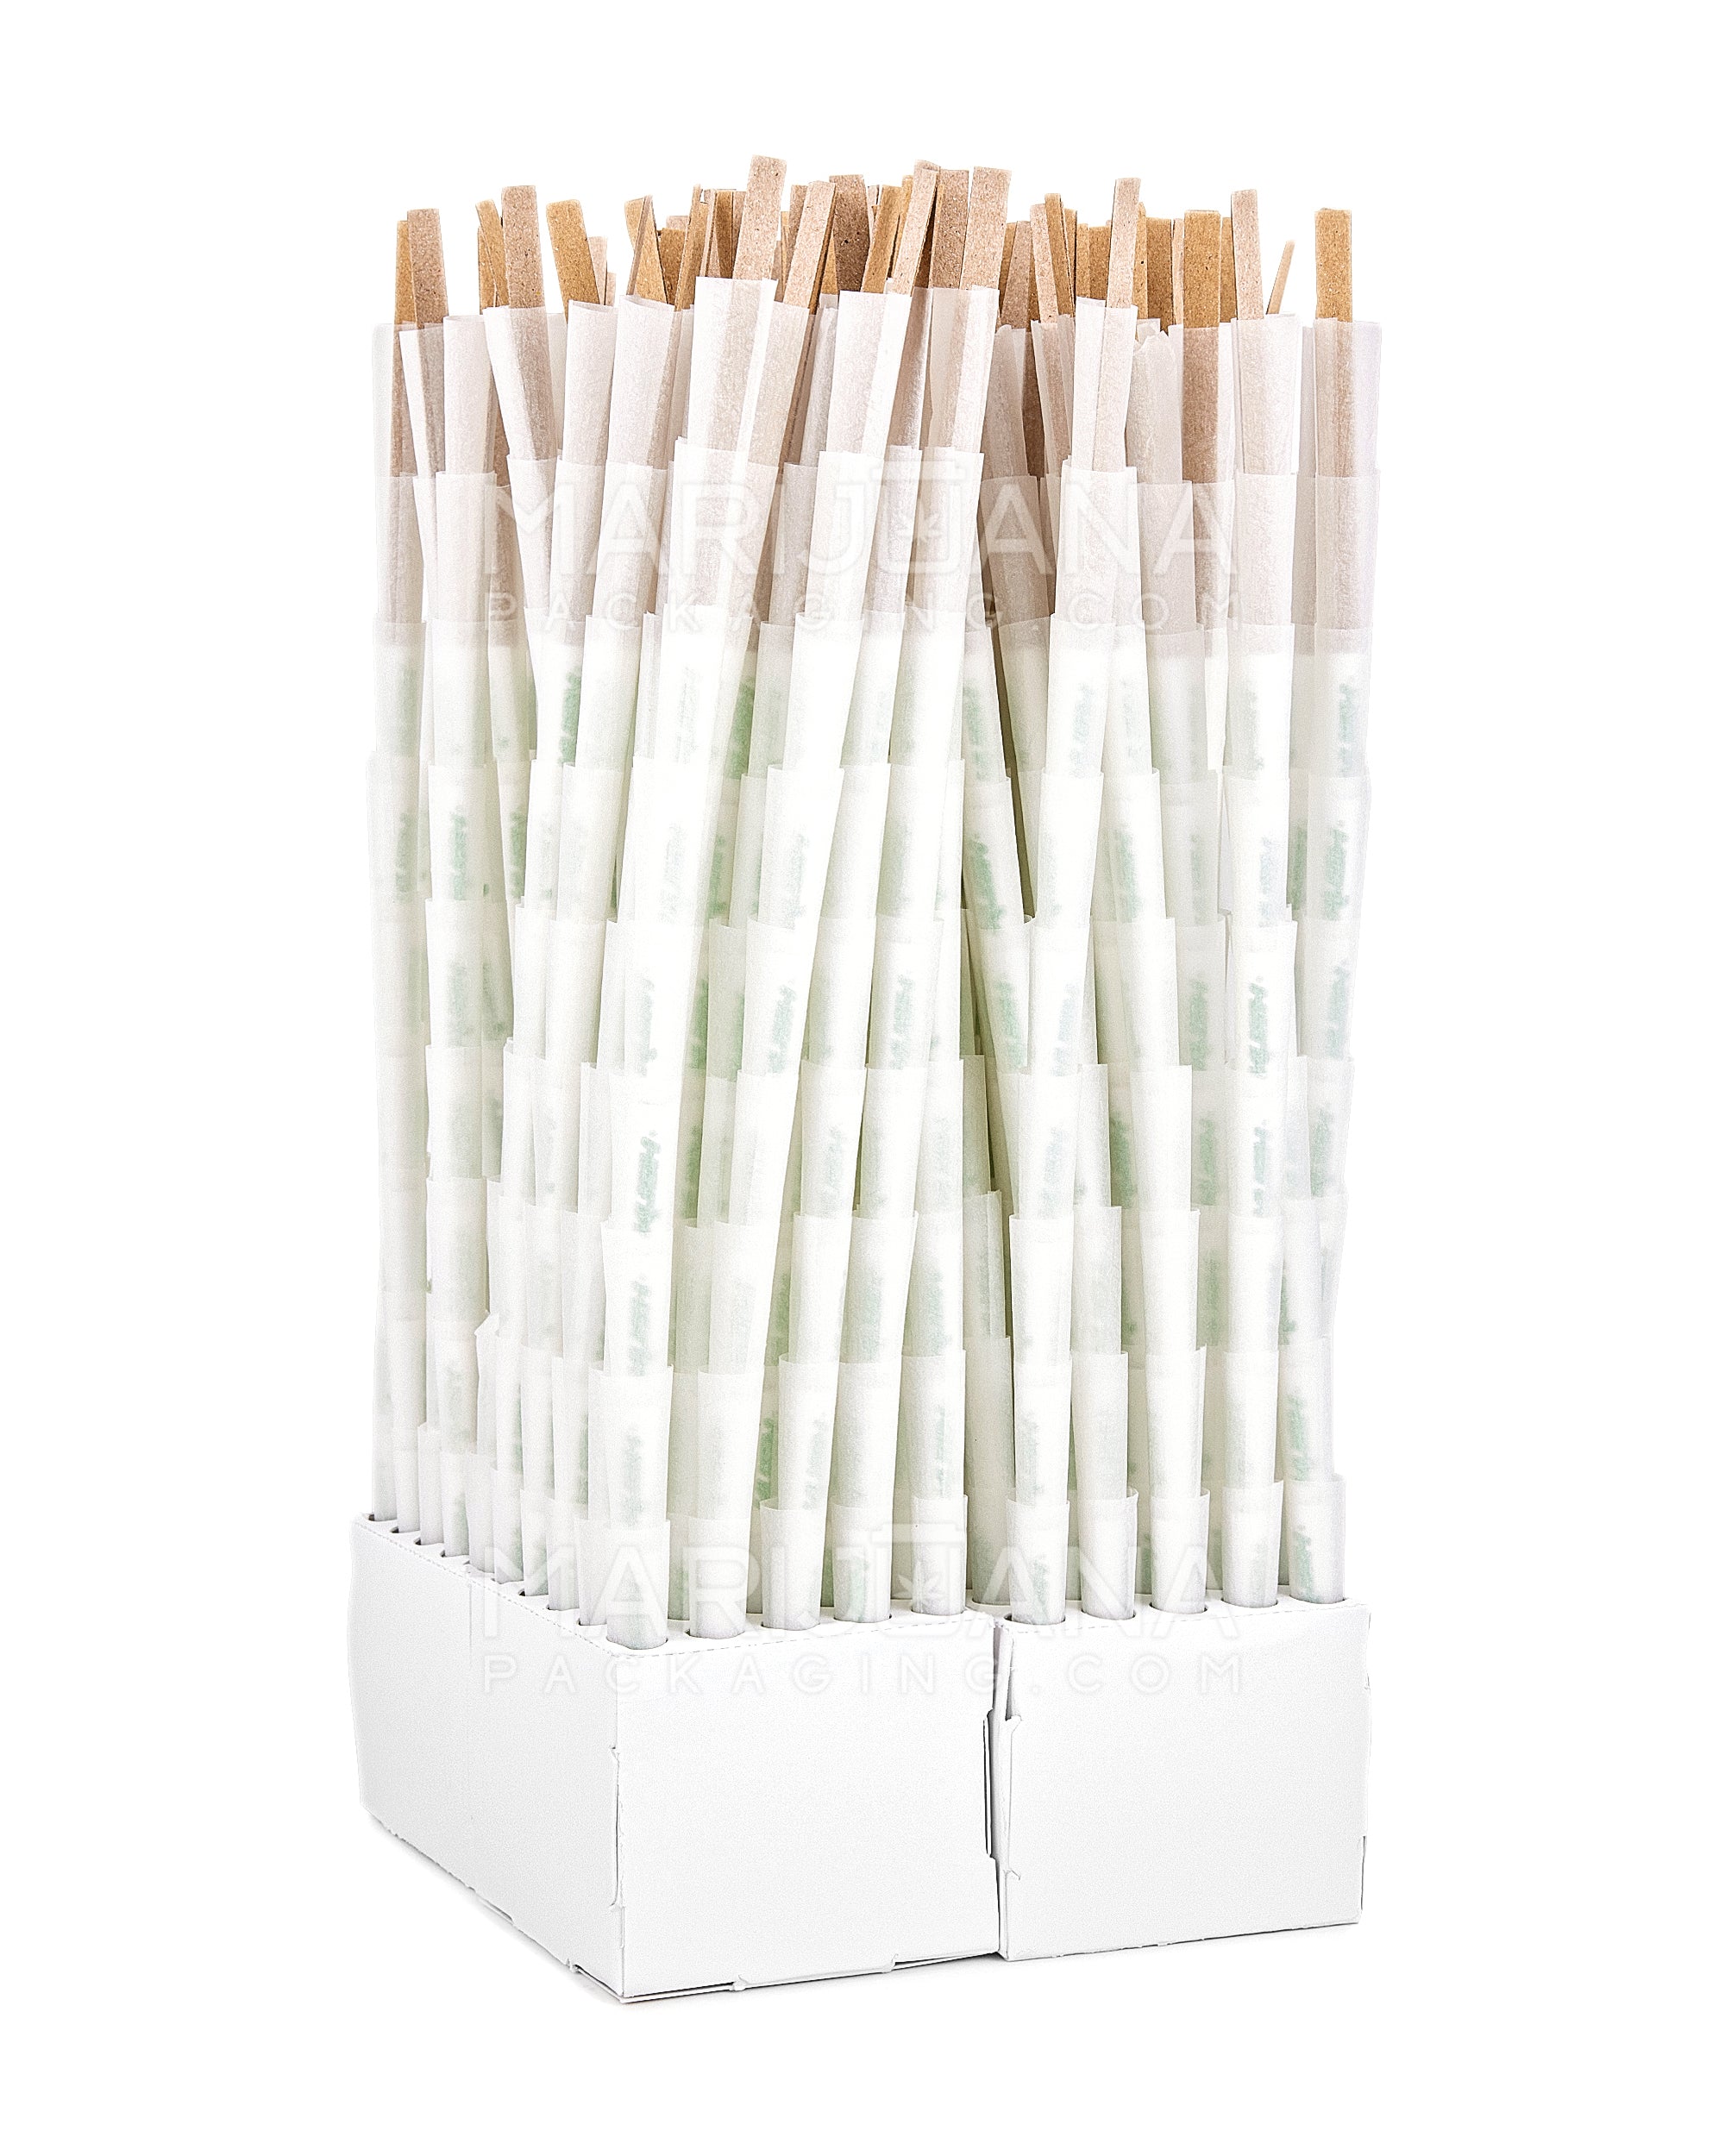 KUSH | Ultra Thin 1 1/4 Pre-Rolled Cones w/ Filter Tip | 84mm - Classic White Paper - 900 Count - 3